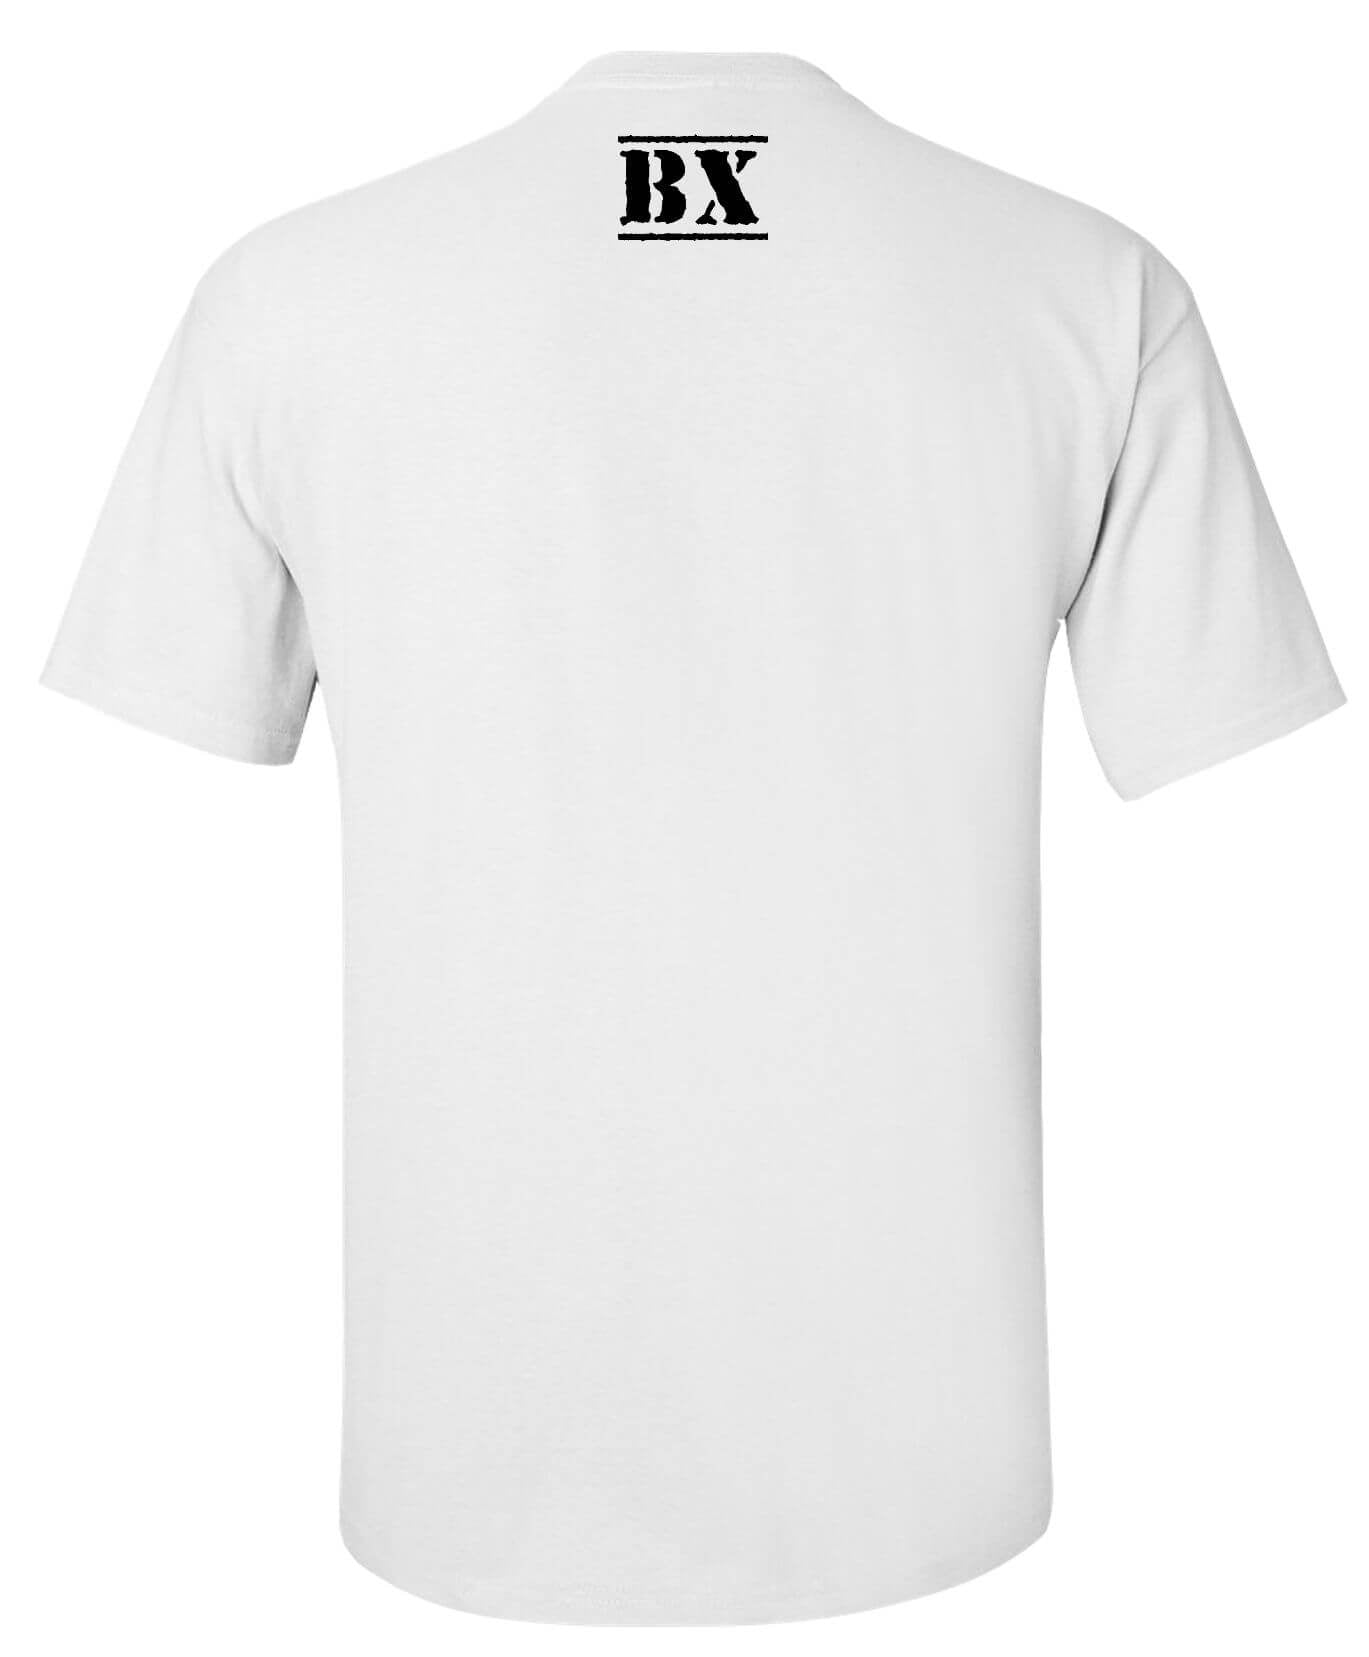 The Bronx Shirt - Valentines Special (white)